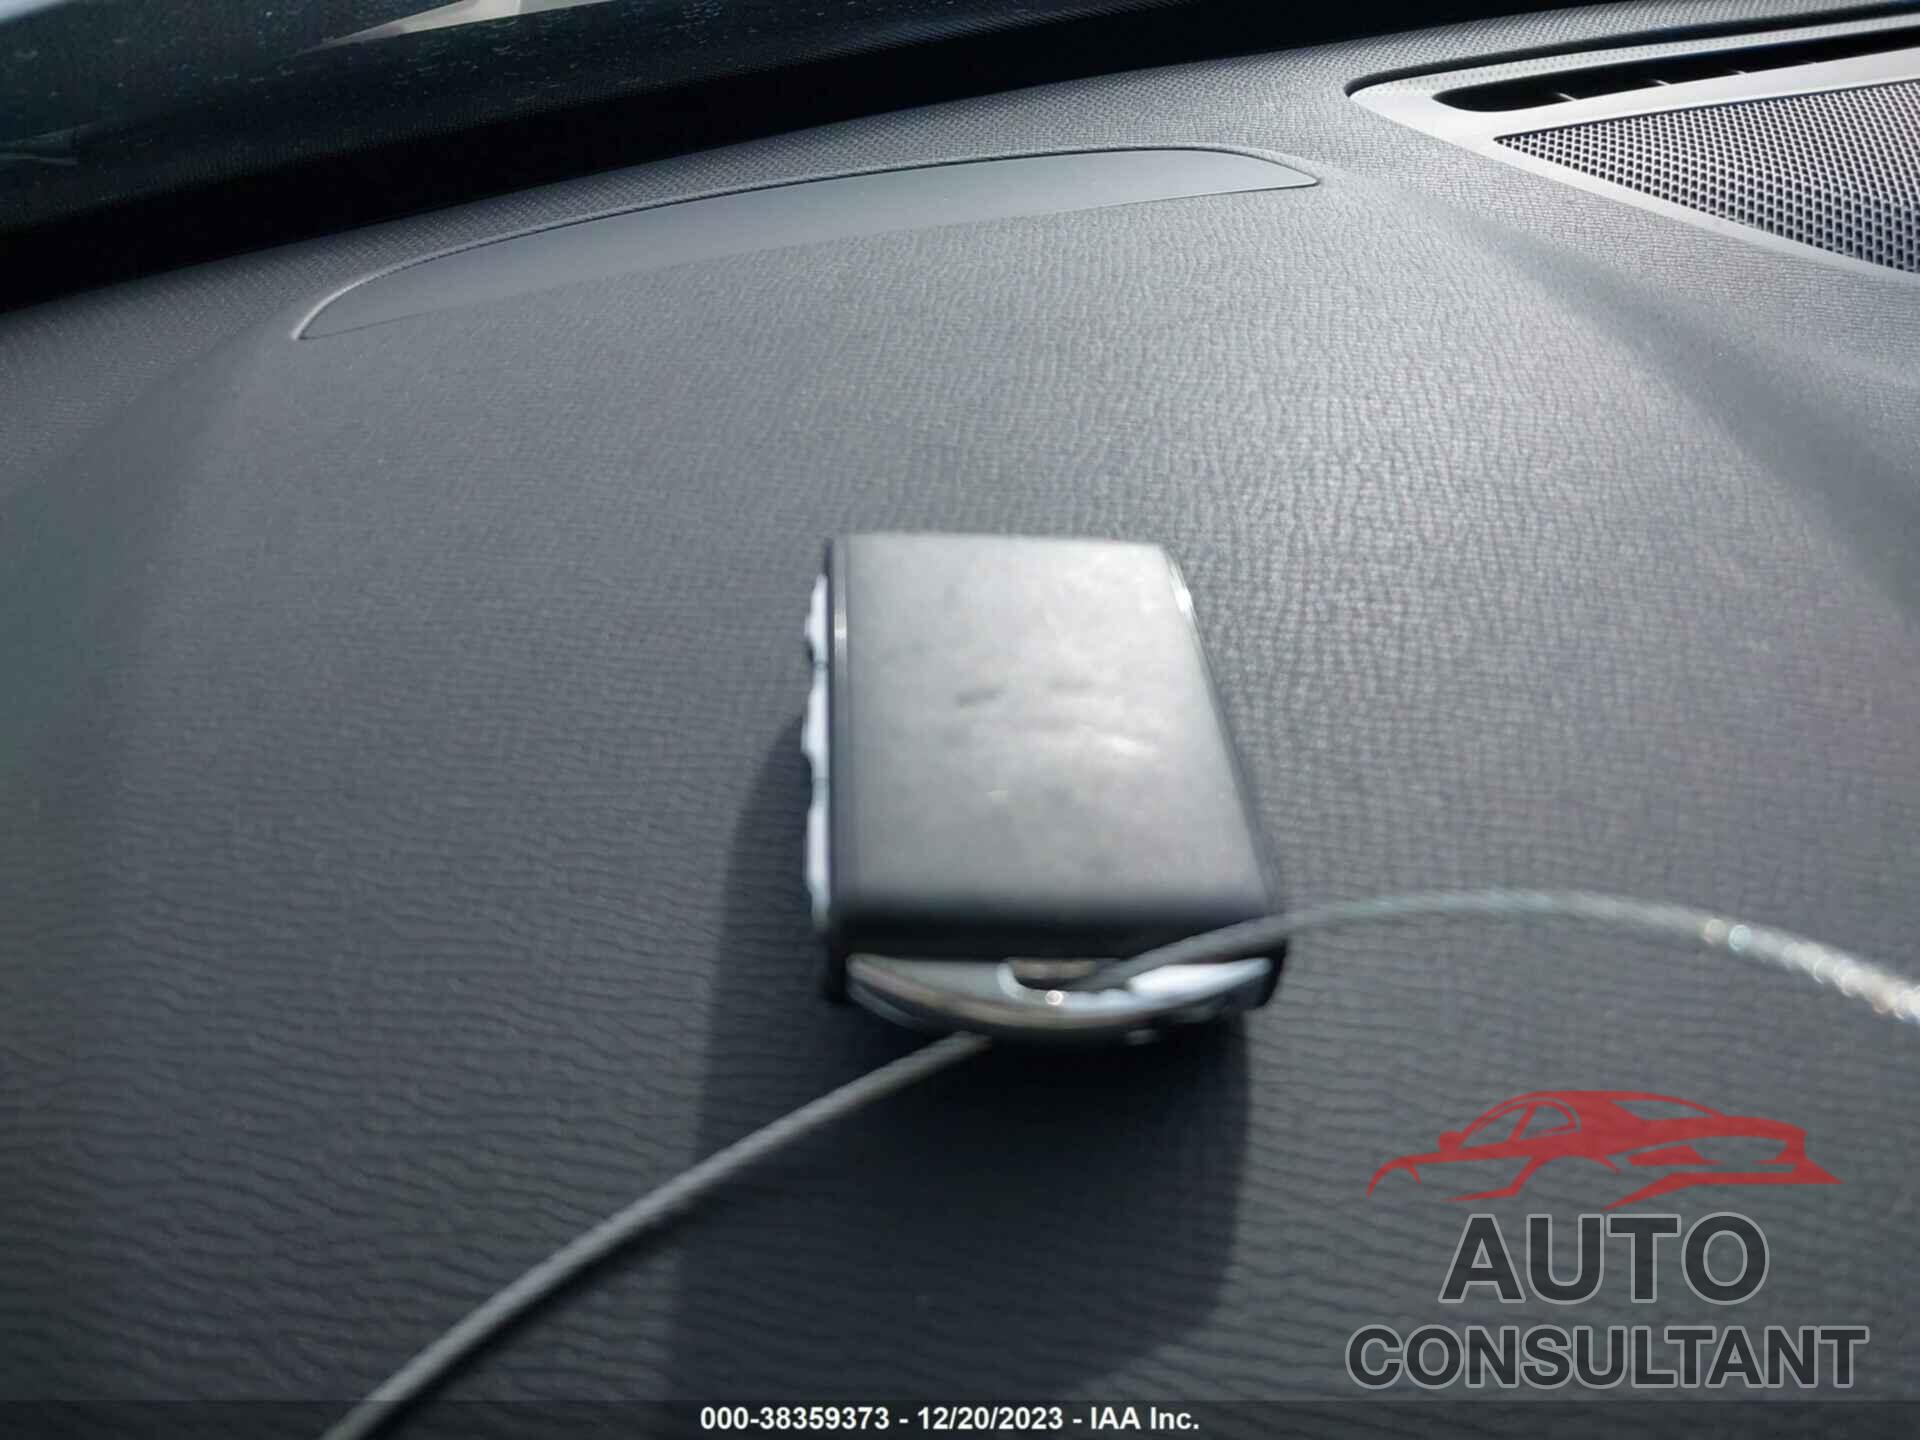 VOLVO XC90 RECHARGE PLUG-IN HYBRID 2023 - YV4H60CW1P1956400